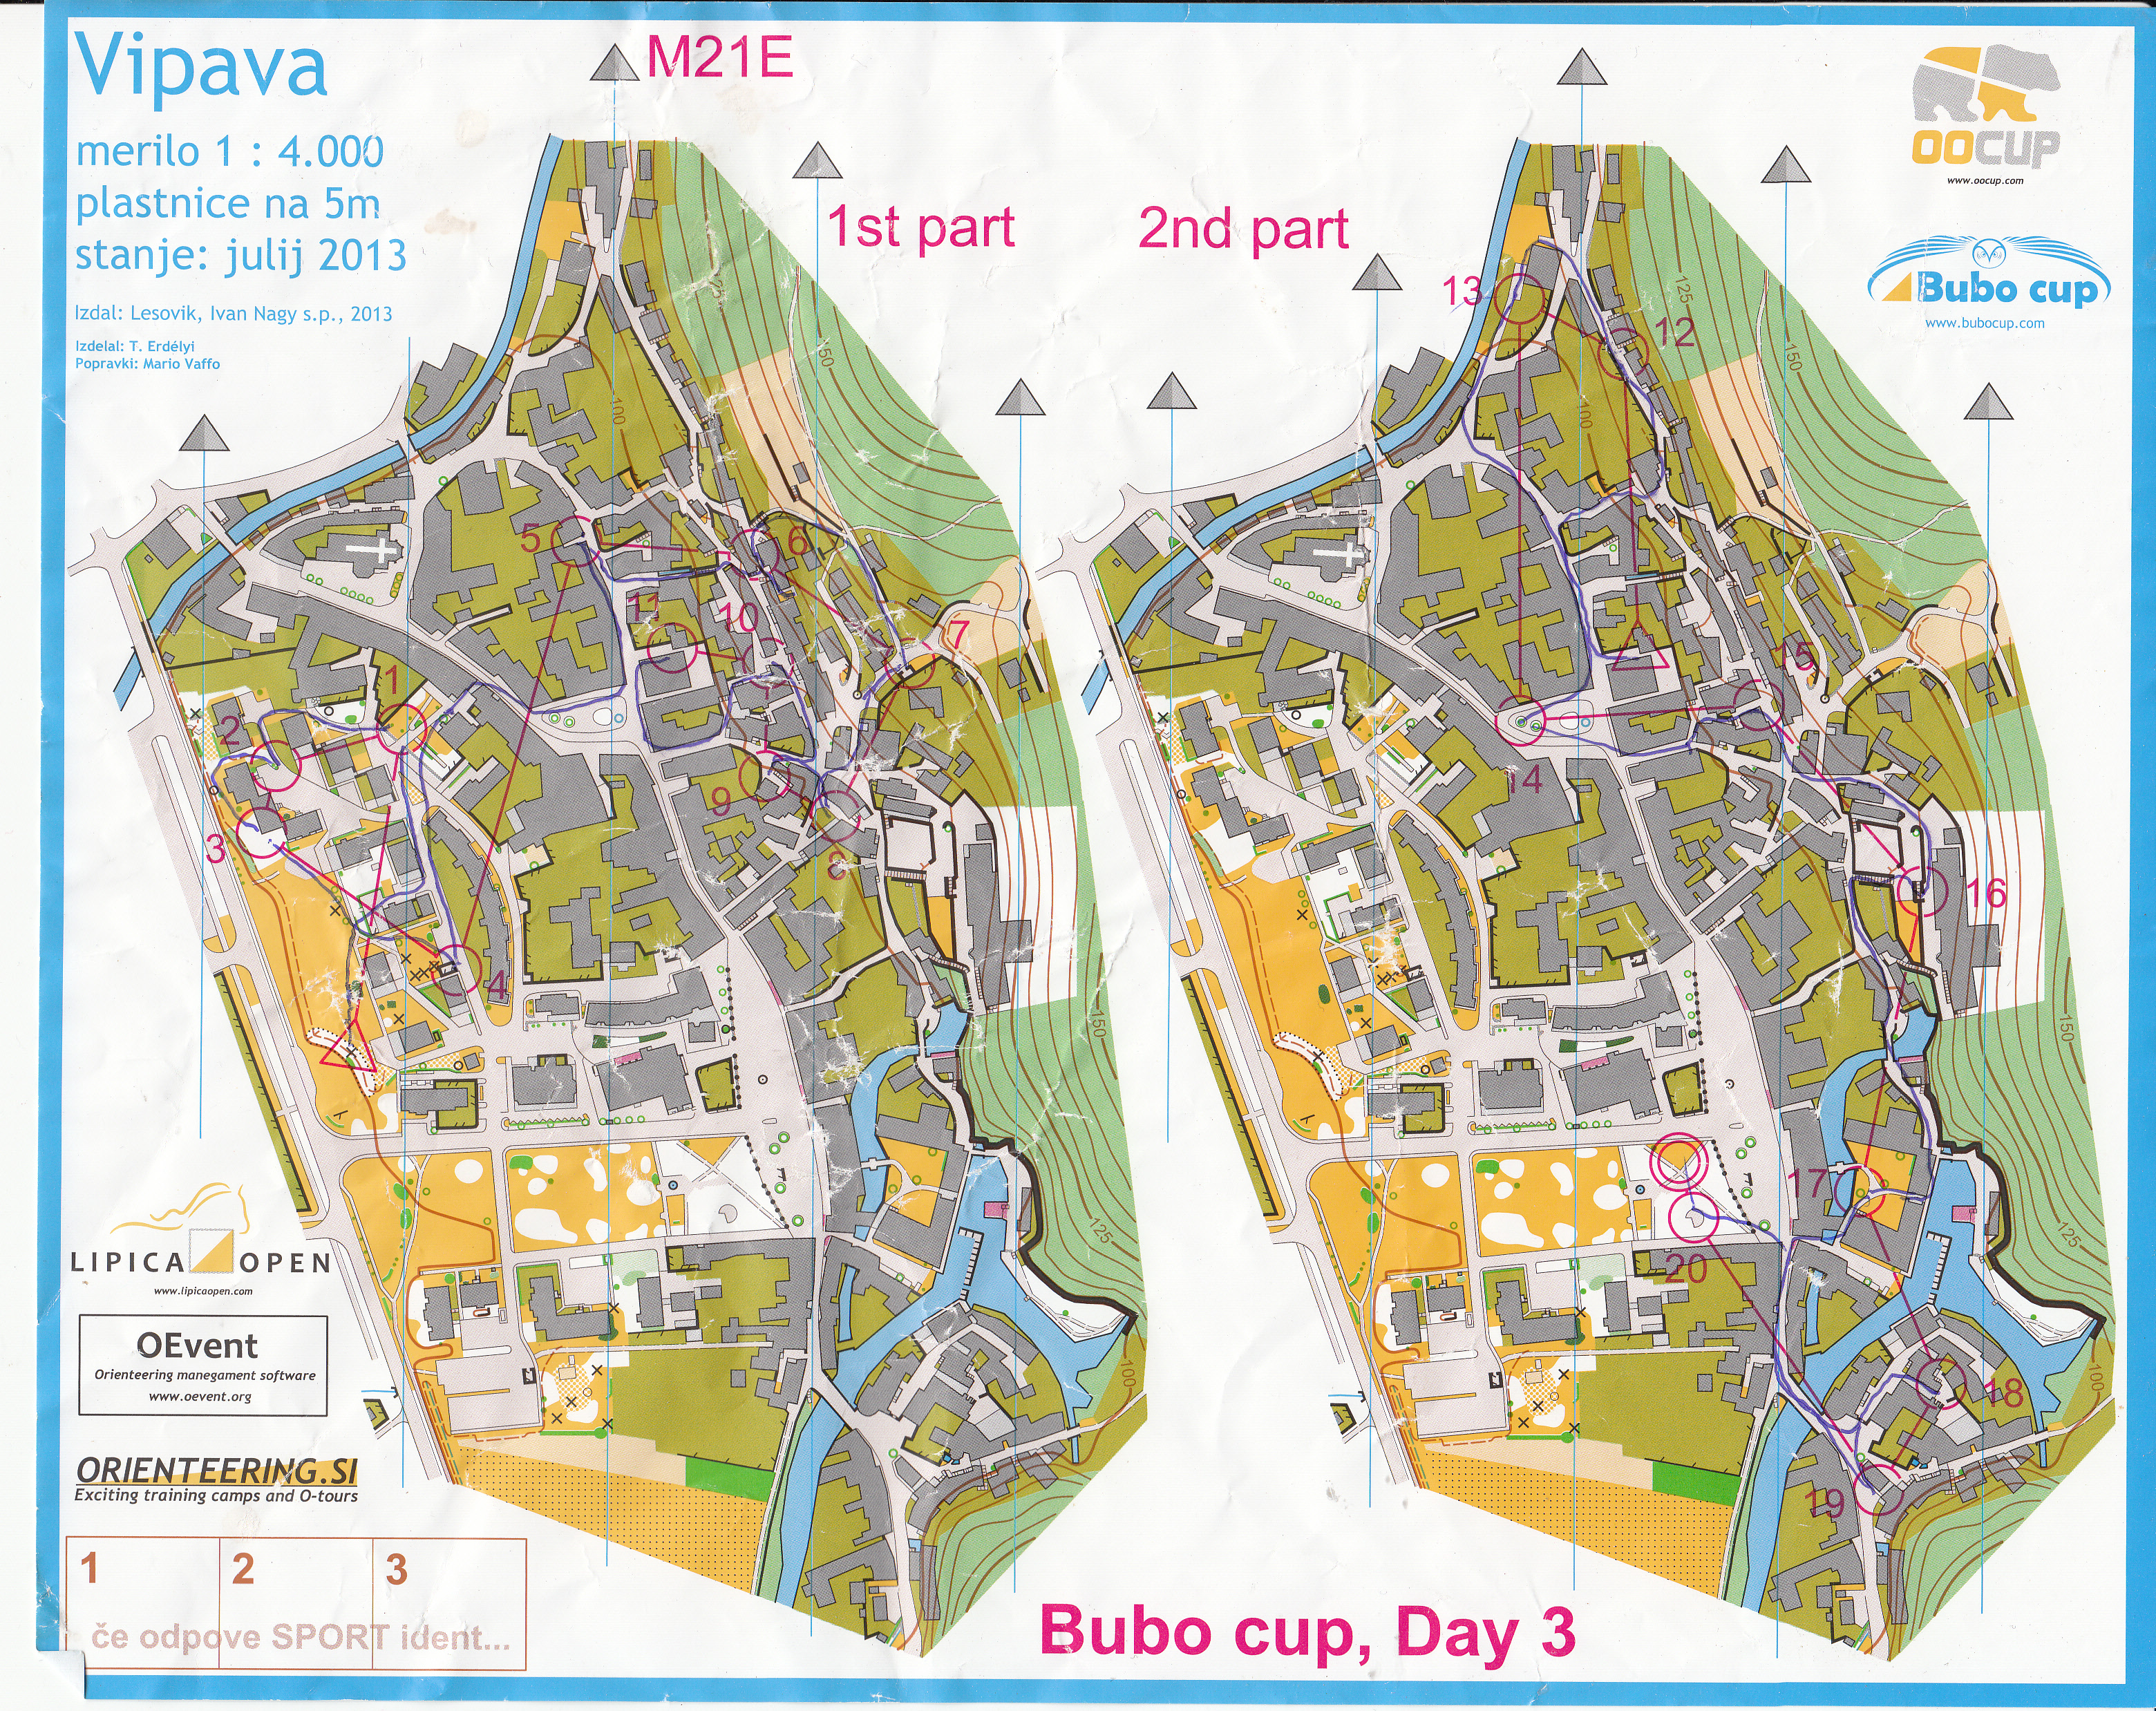 Bubo cup, Day 3 (21/07/2013)